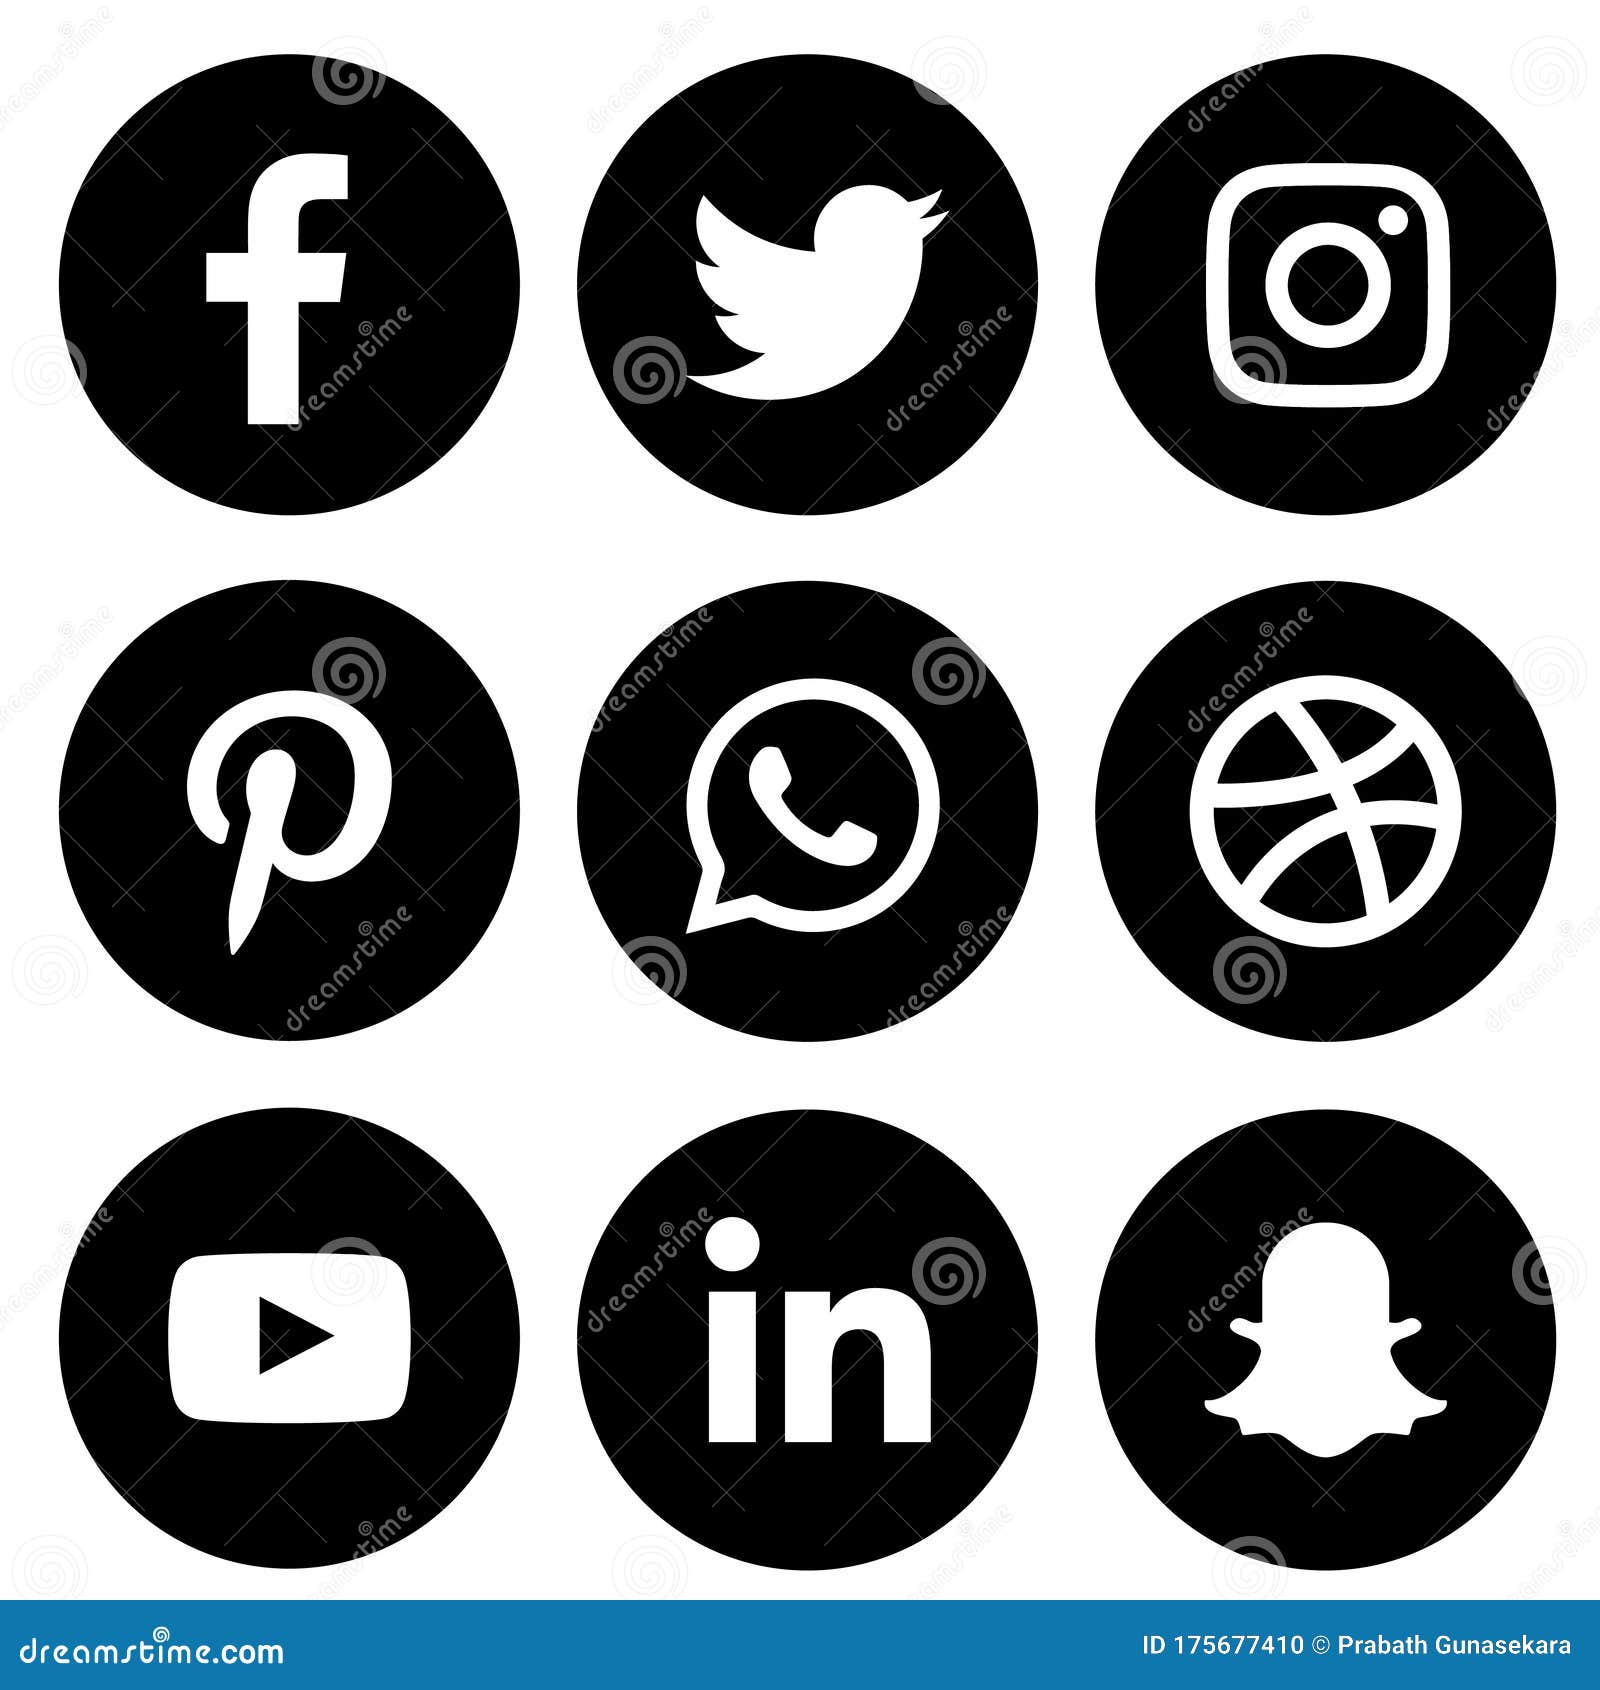 Black White Social Media Icons Set Of Facebook Twitter Instagram Pinterest Whatsapp Dribbble You Tube Linked In And Snap Chat Editorial Image Illustration Of Dribble File